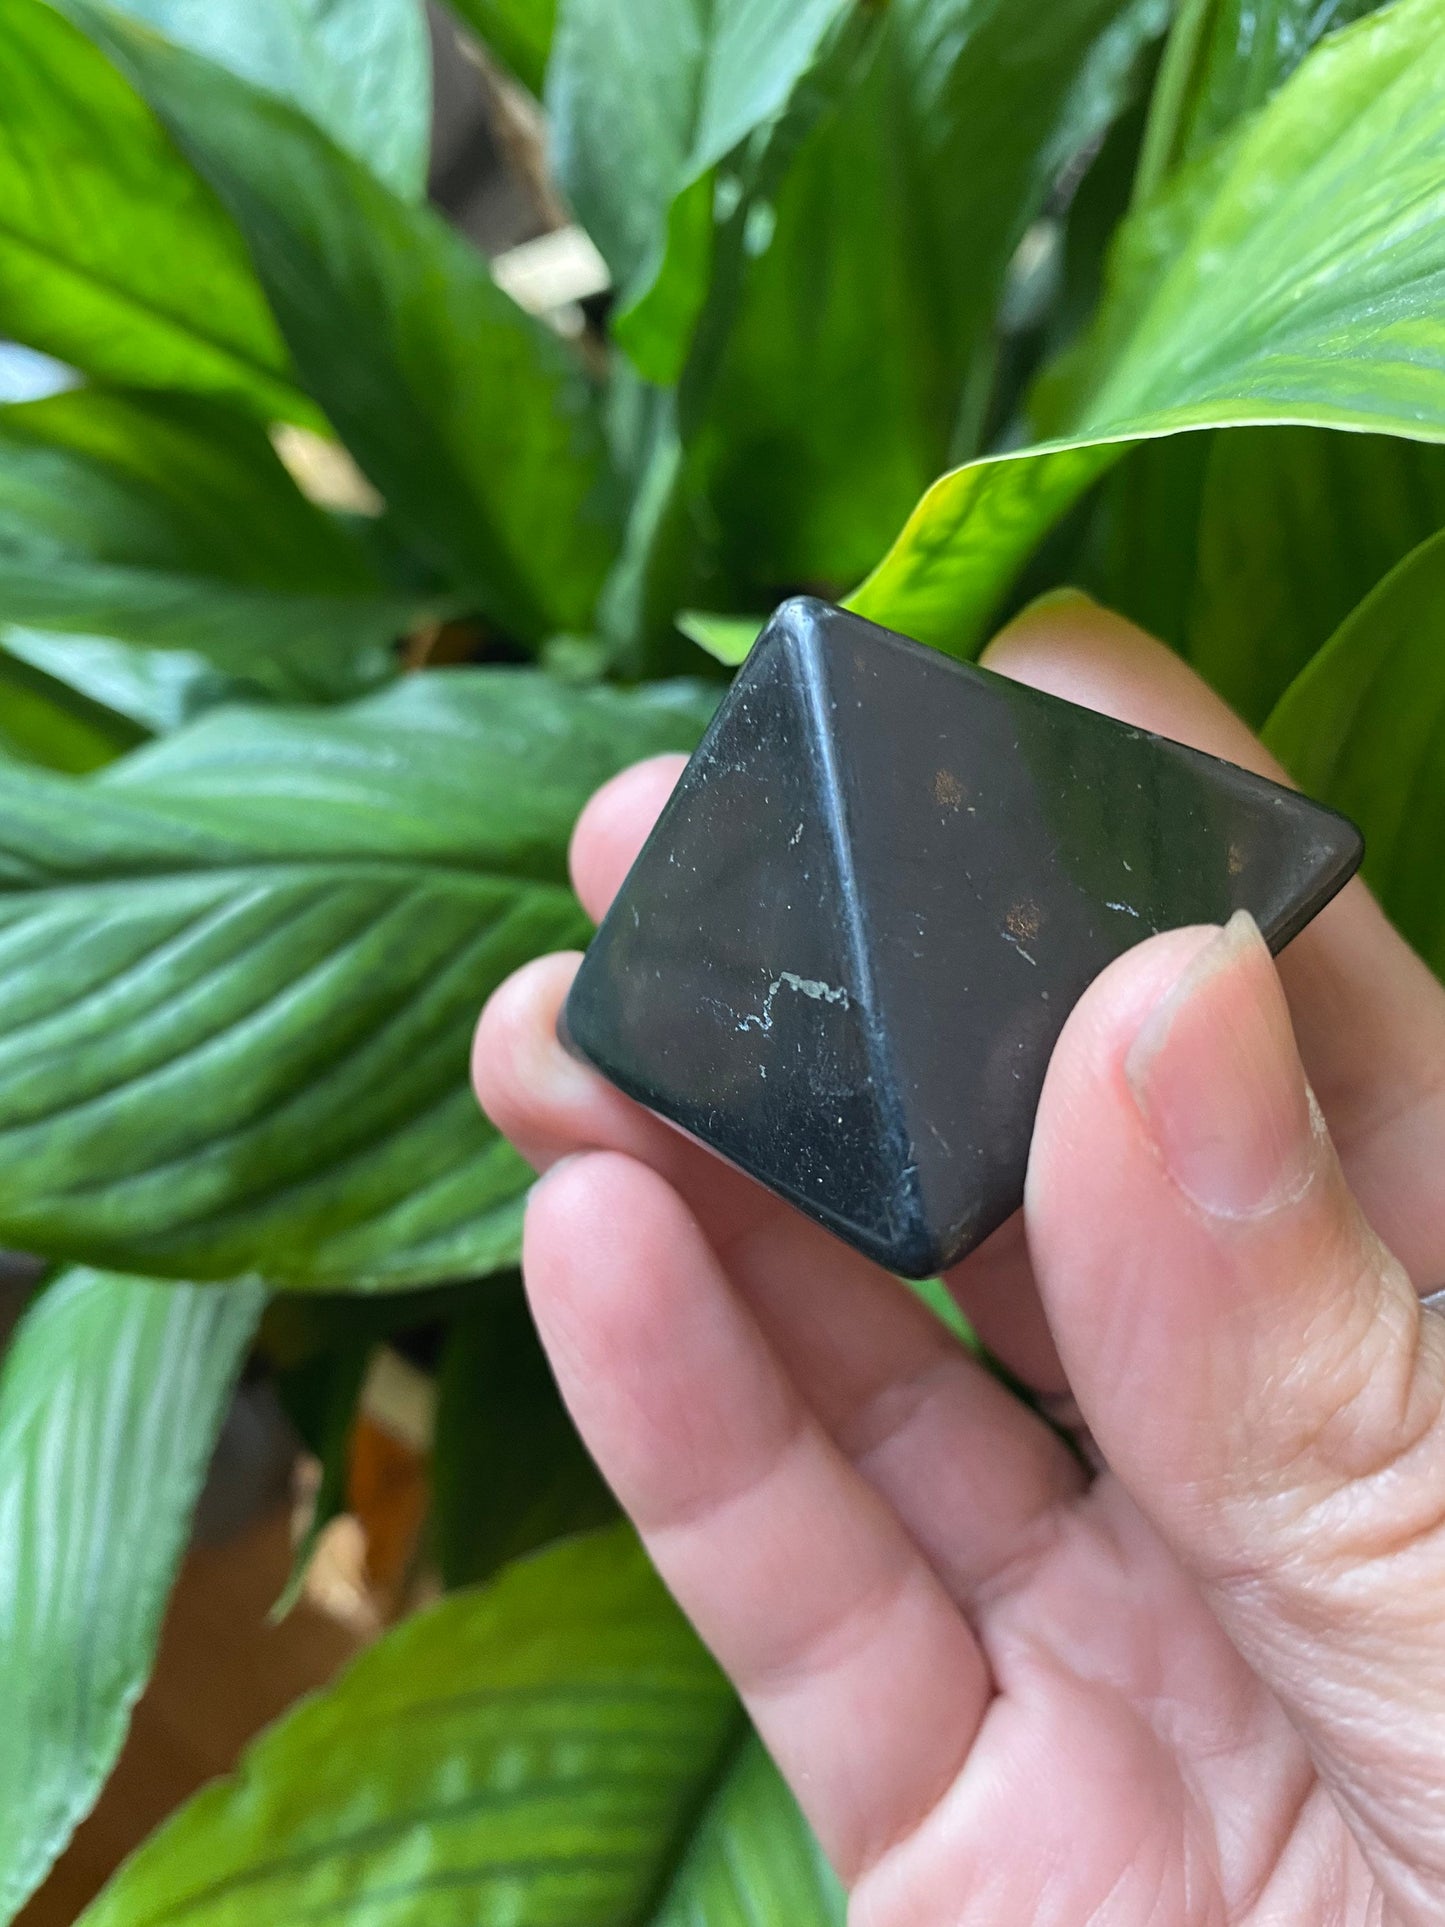 Shungite Polished Pyramid / Protection From EMFs (Electromagnetic Frequency) /Detoxifying / High Quality Mineral From Russia